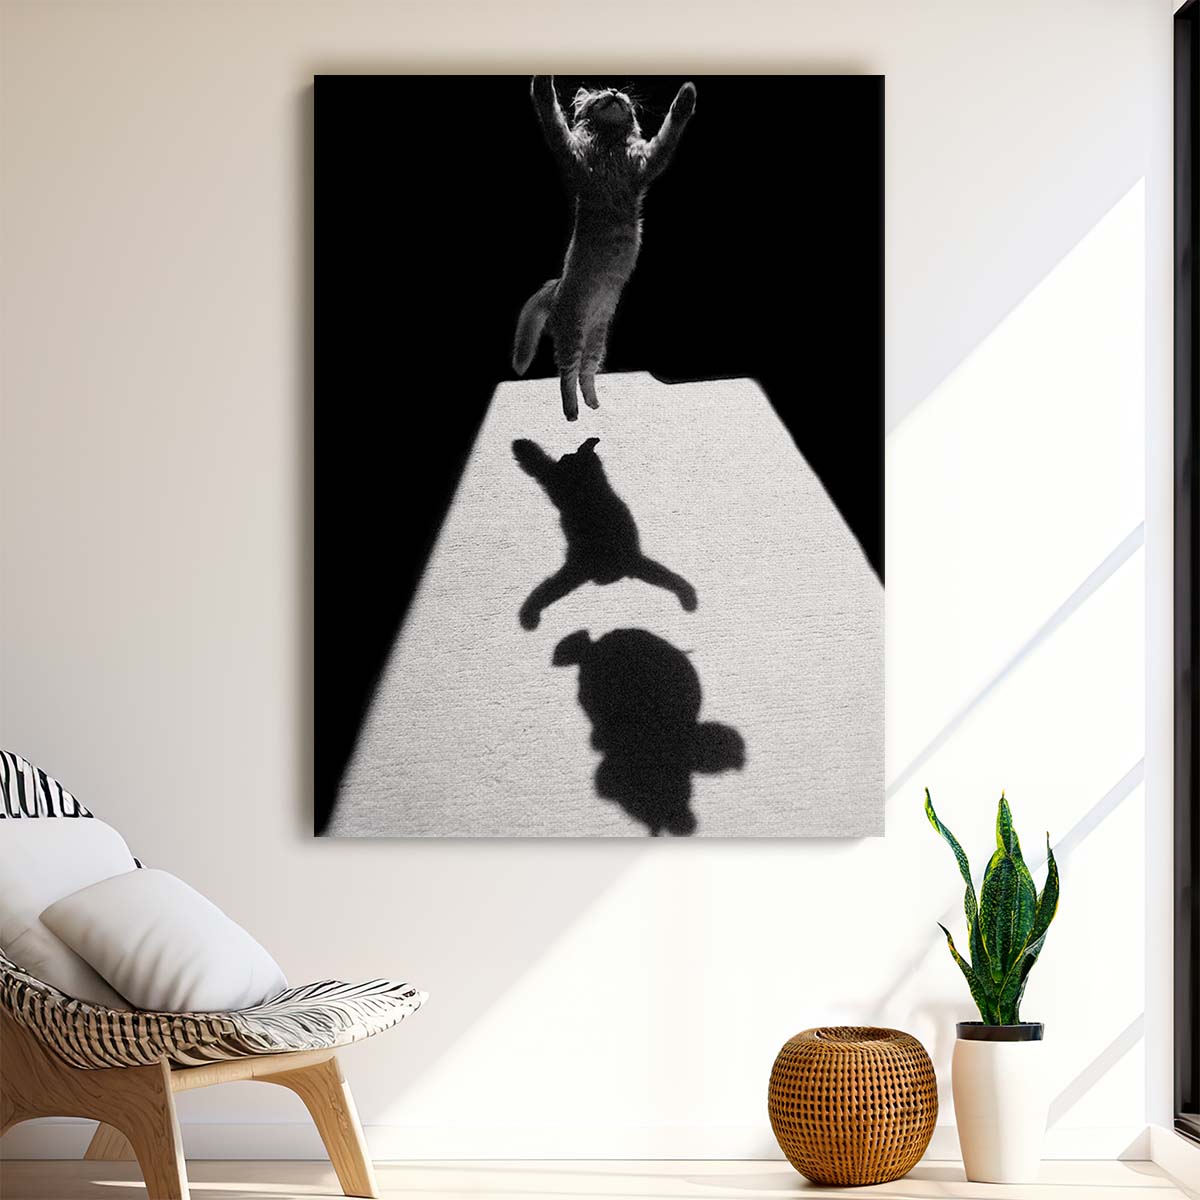 Minimalist Monochrome Photography of Playful Cat Leaping in Shadows by Luxuriance Designs, made in USA